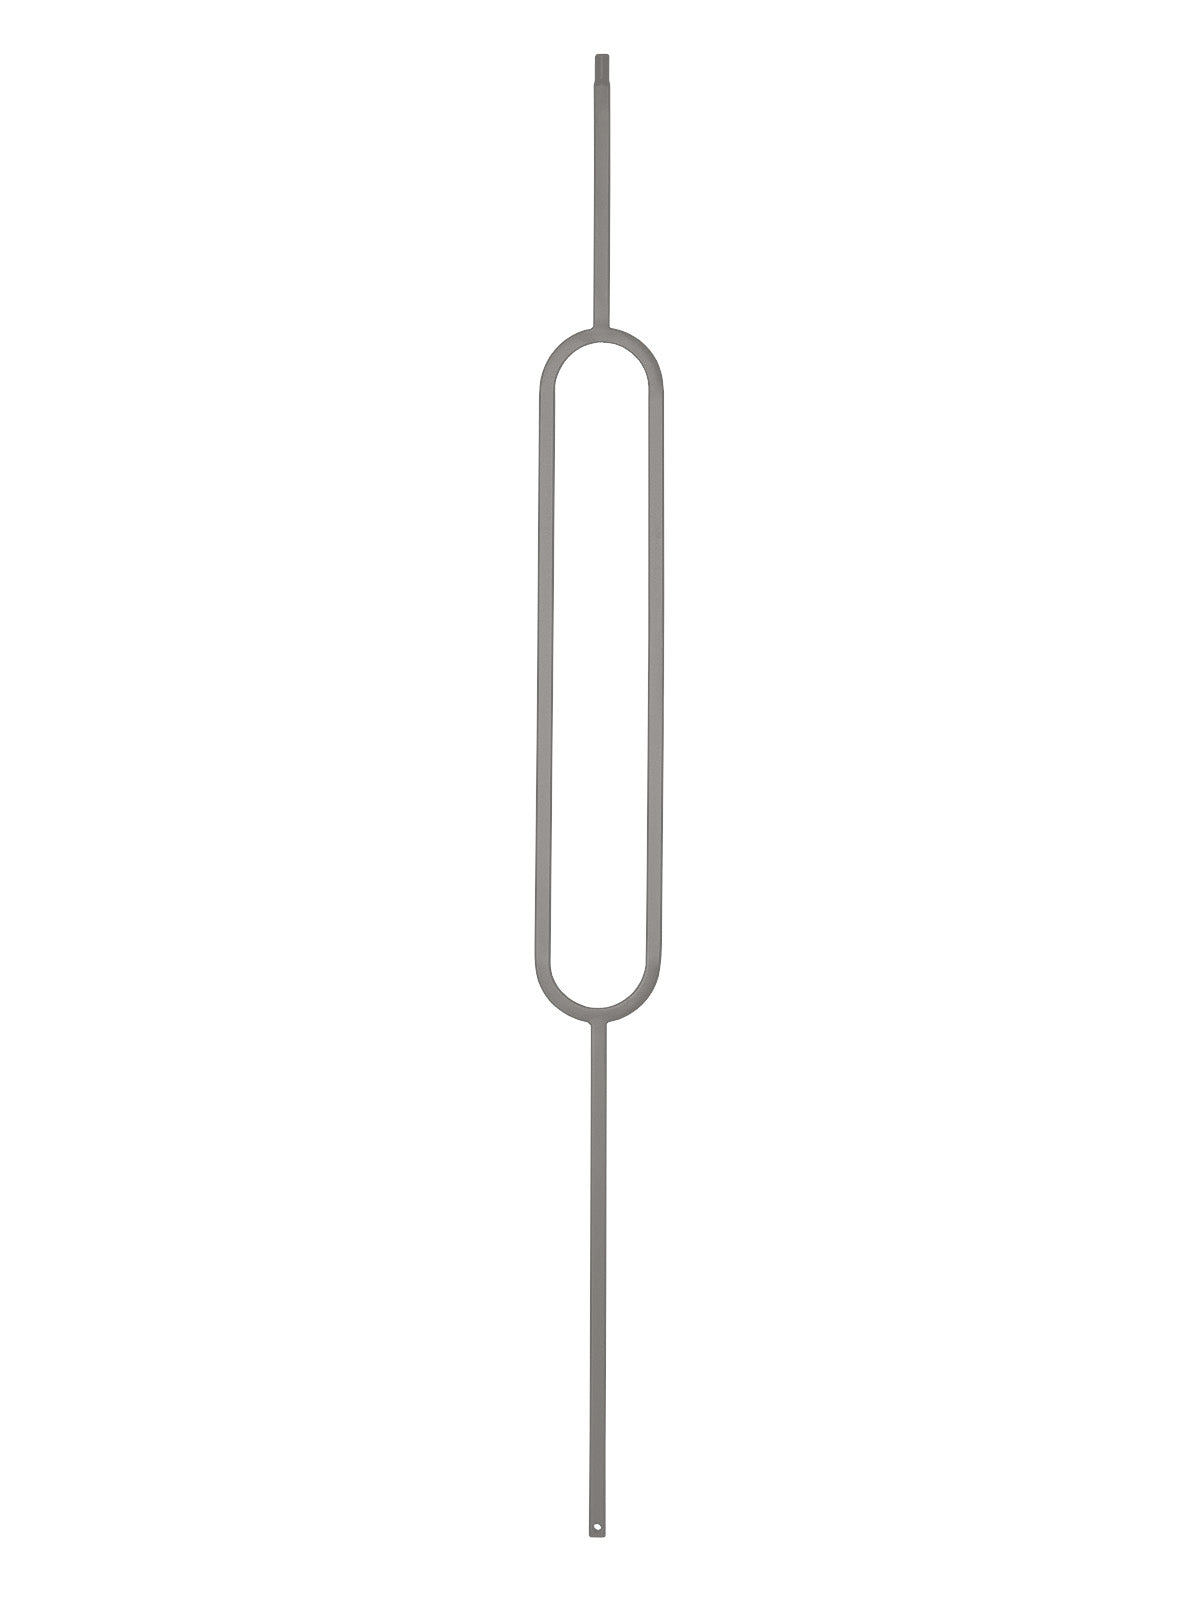 Iron Baluster 9088 - 1/2" Square - 20-3/4" Contemporary Oval